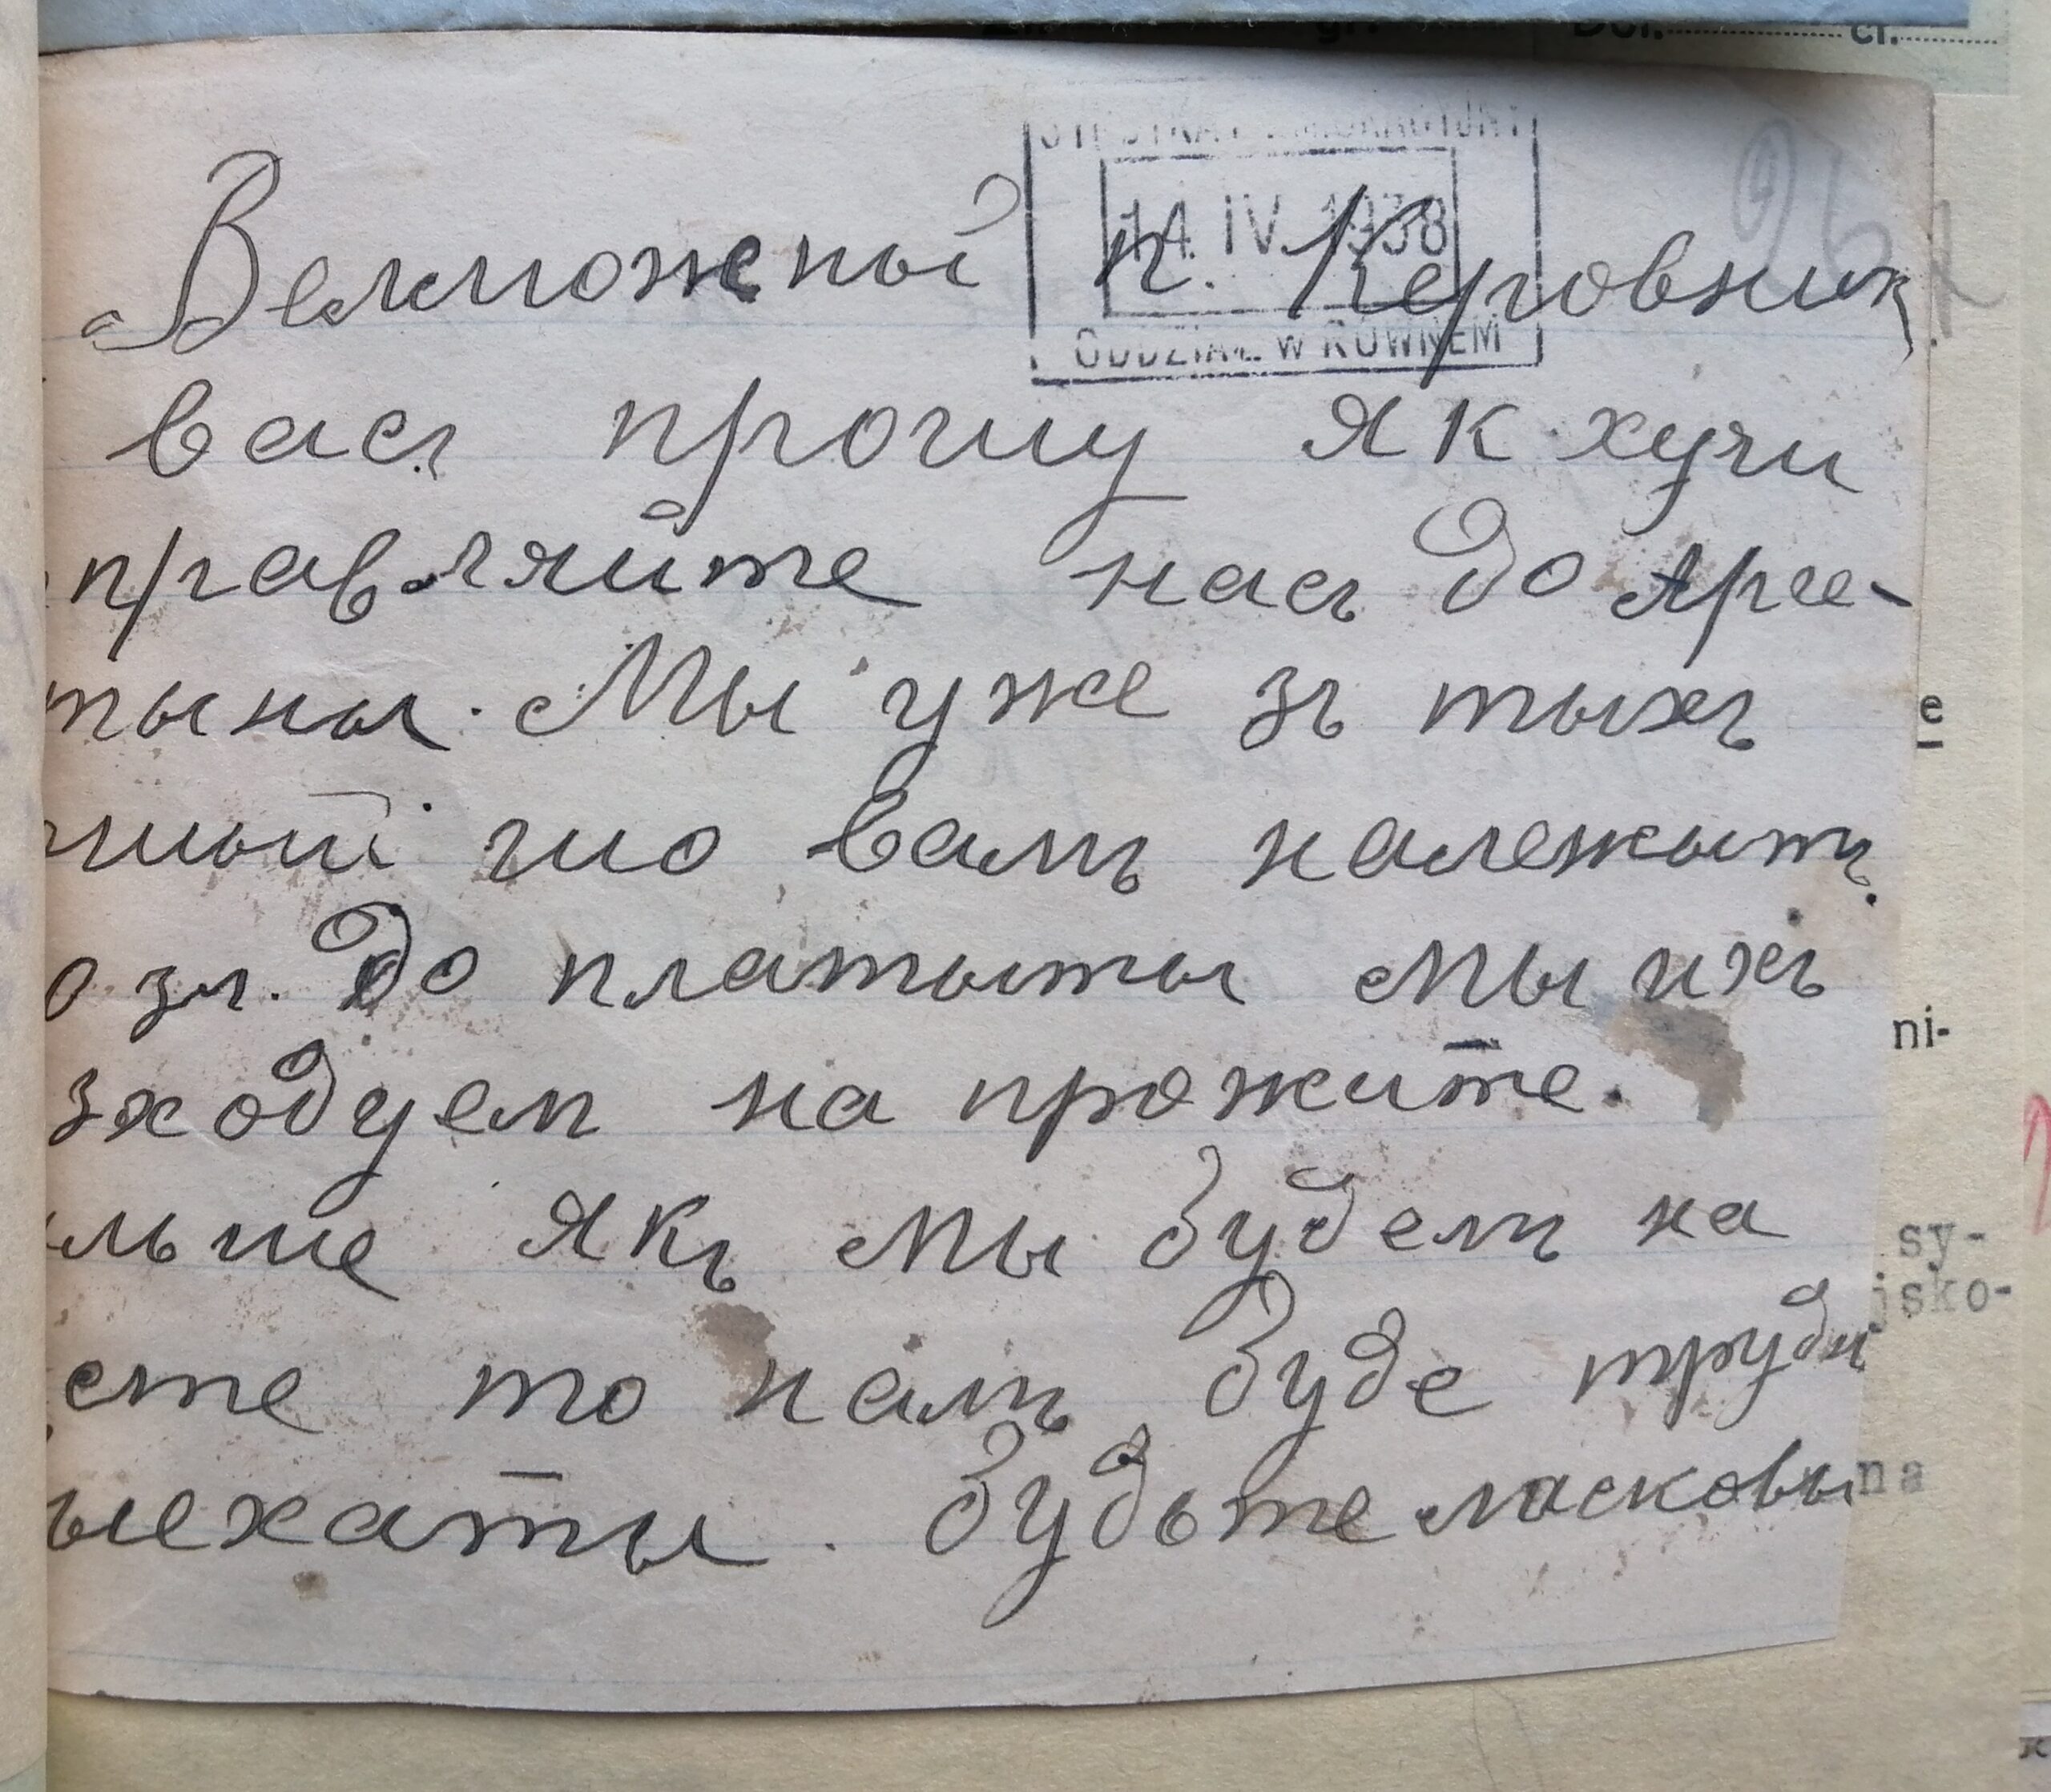 Request of Ukrainian emigrants to send them to Argentina due to the material hardship, 1938